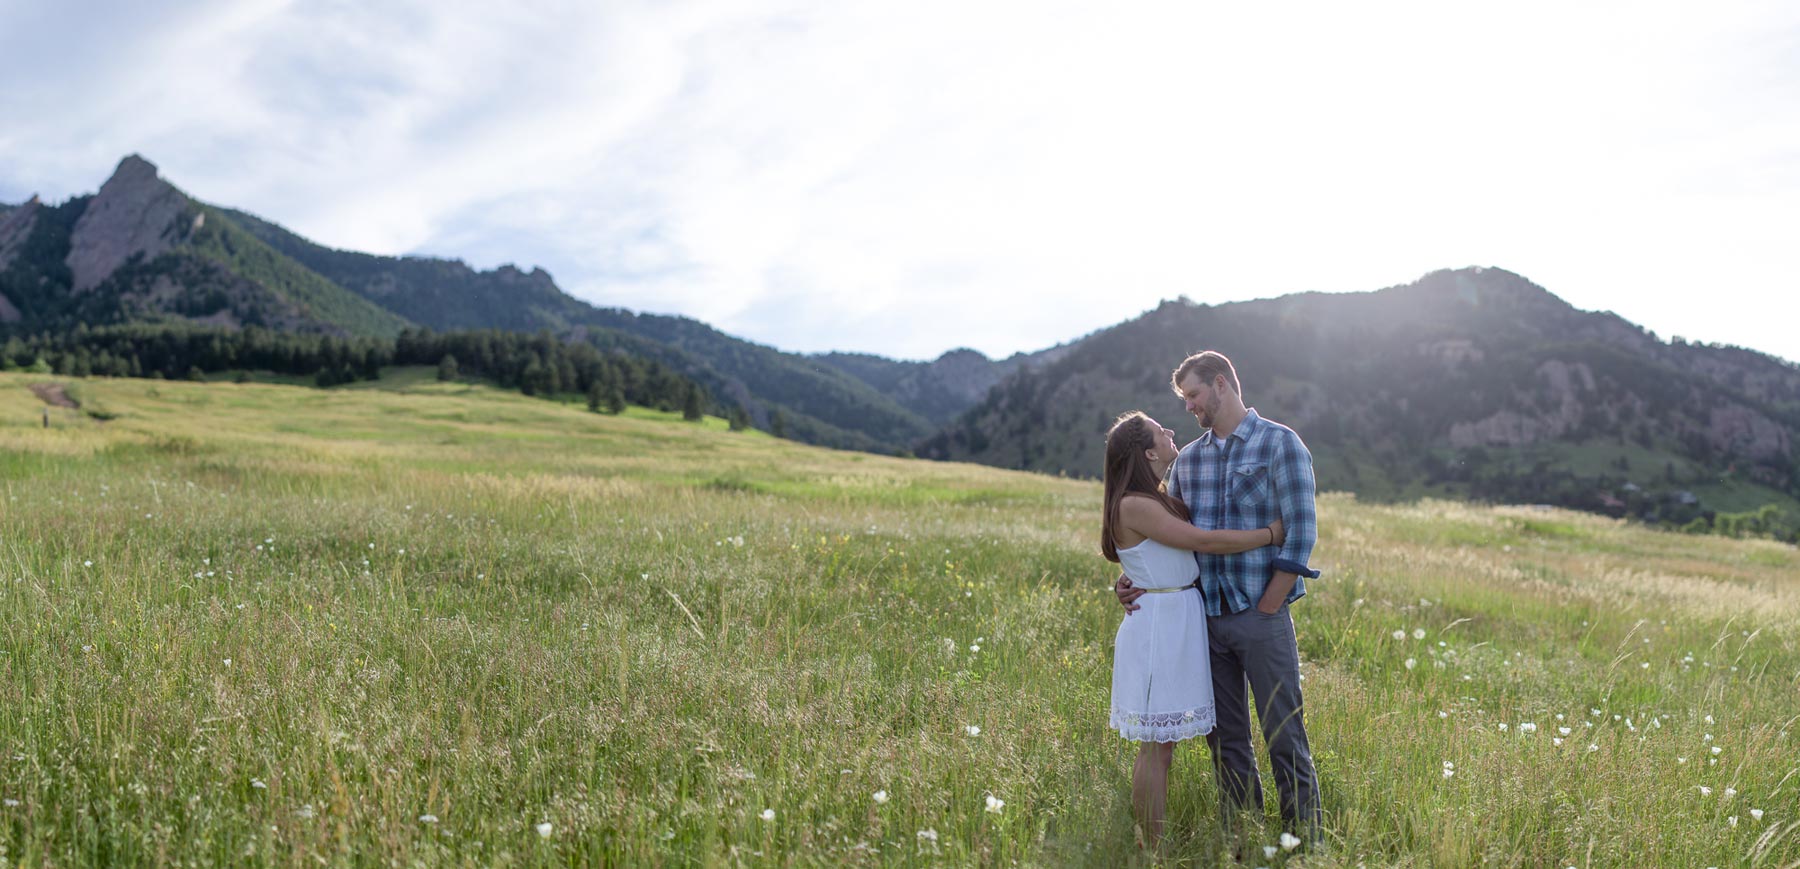 Irving-Photography-Clay-Jessica-Boulder-Engagement-009